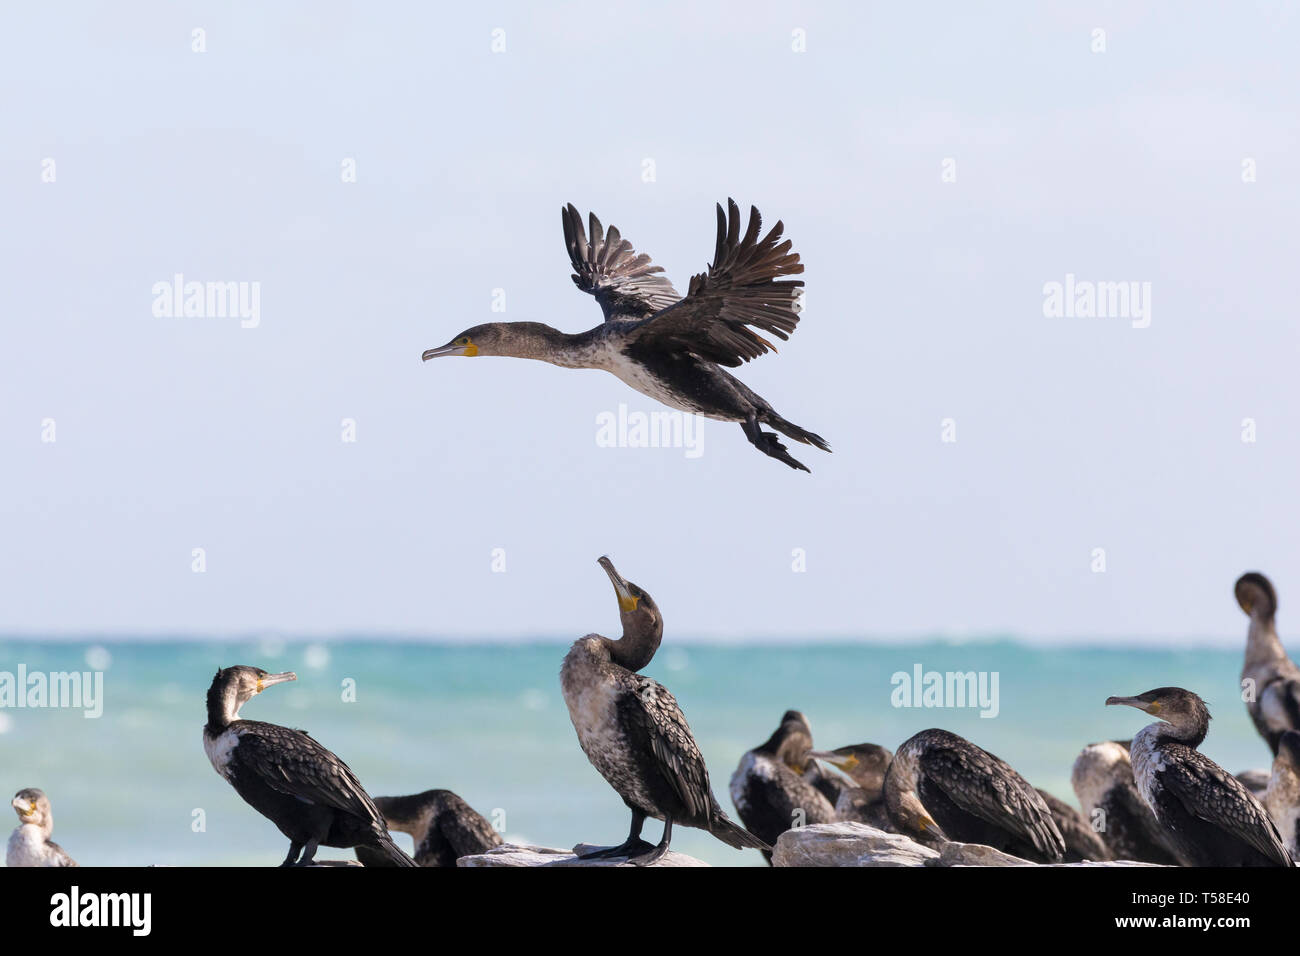 White-breasted cormorants flying, Phalacrocorax carbo, Phalacrocorax lucidus, colony at Struisbaai, Cape l'Agulhas, Western Cape, South Africa Stock Photo